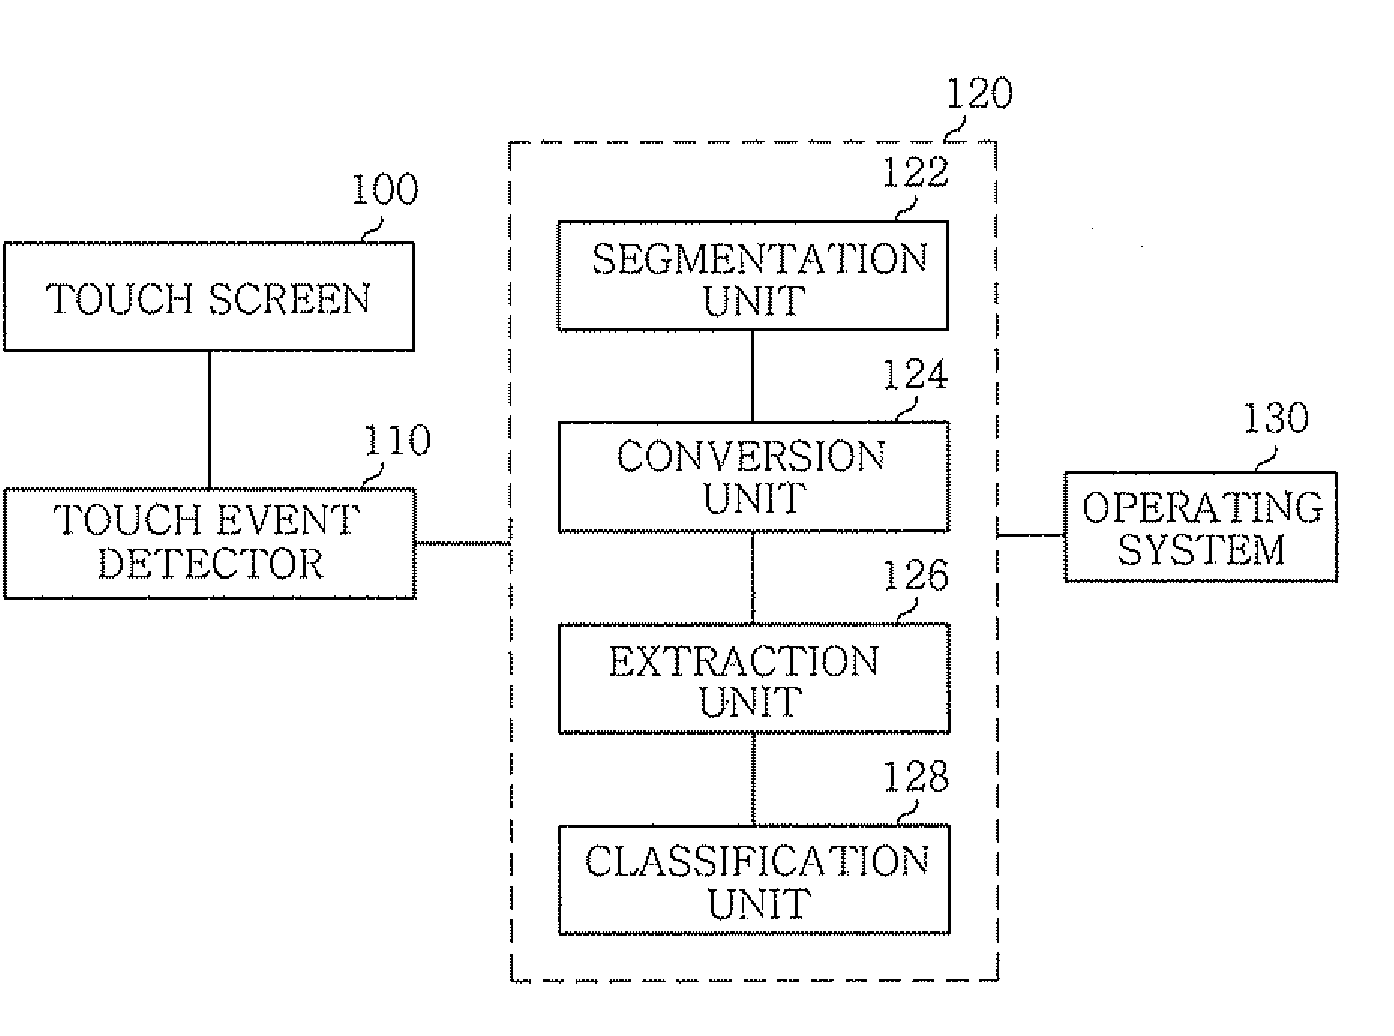 Input tools having viobro-acoustically distinct regions and computing device for use with the same